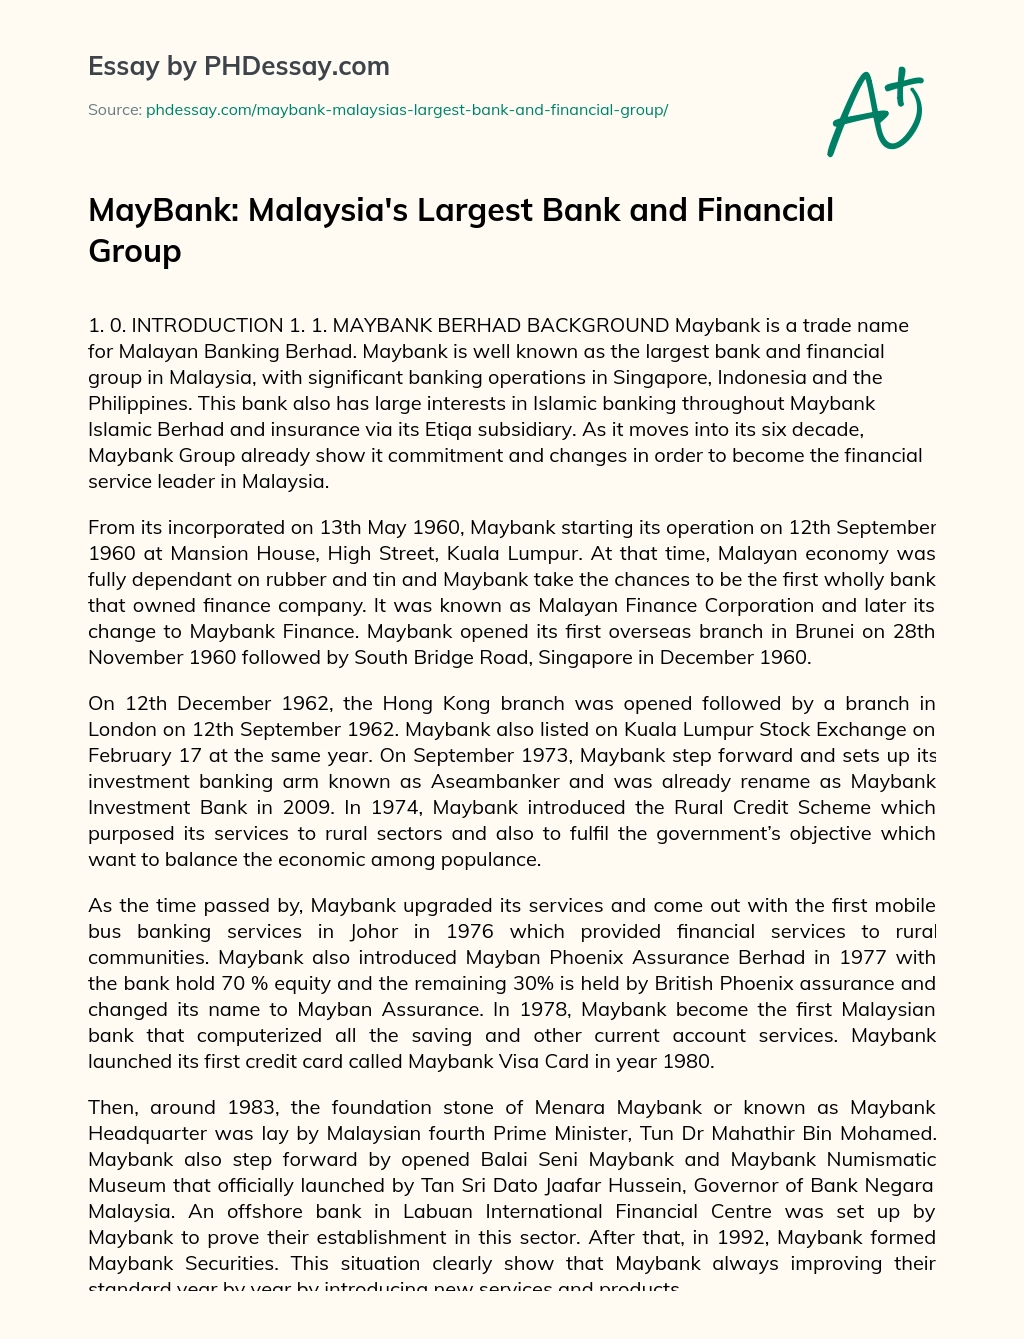 MayBank: Malaysia’s Largest Bank and Financial Group essay